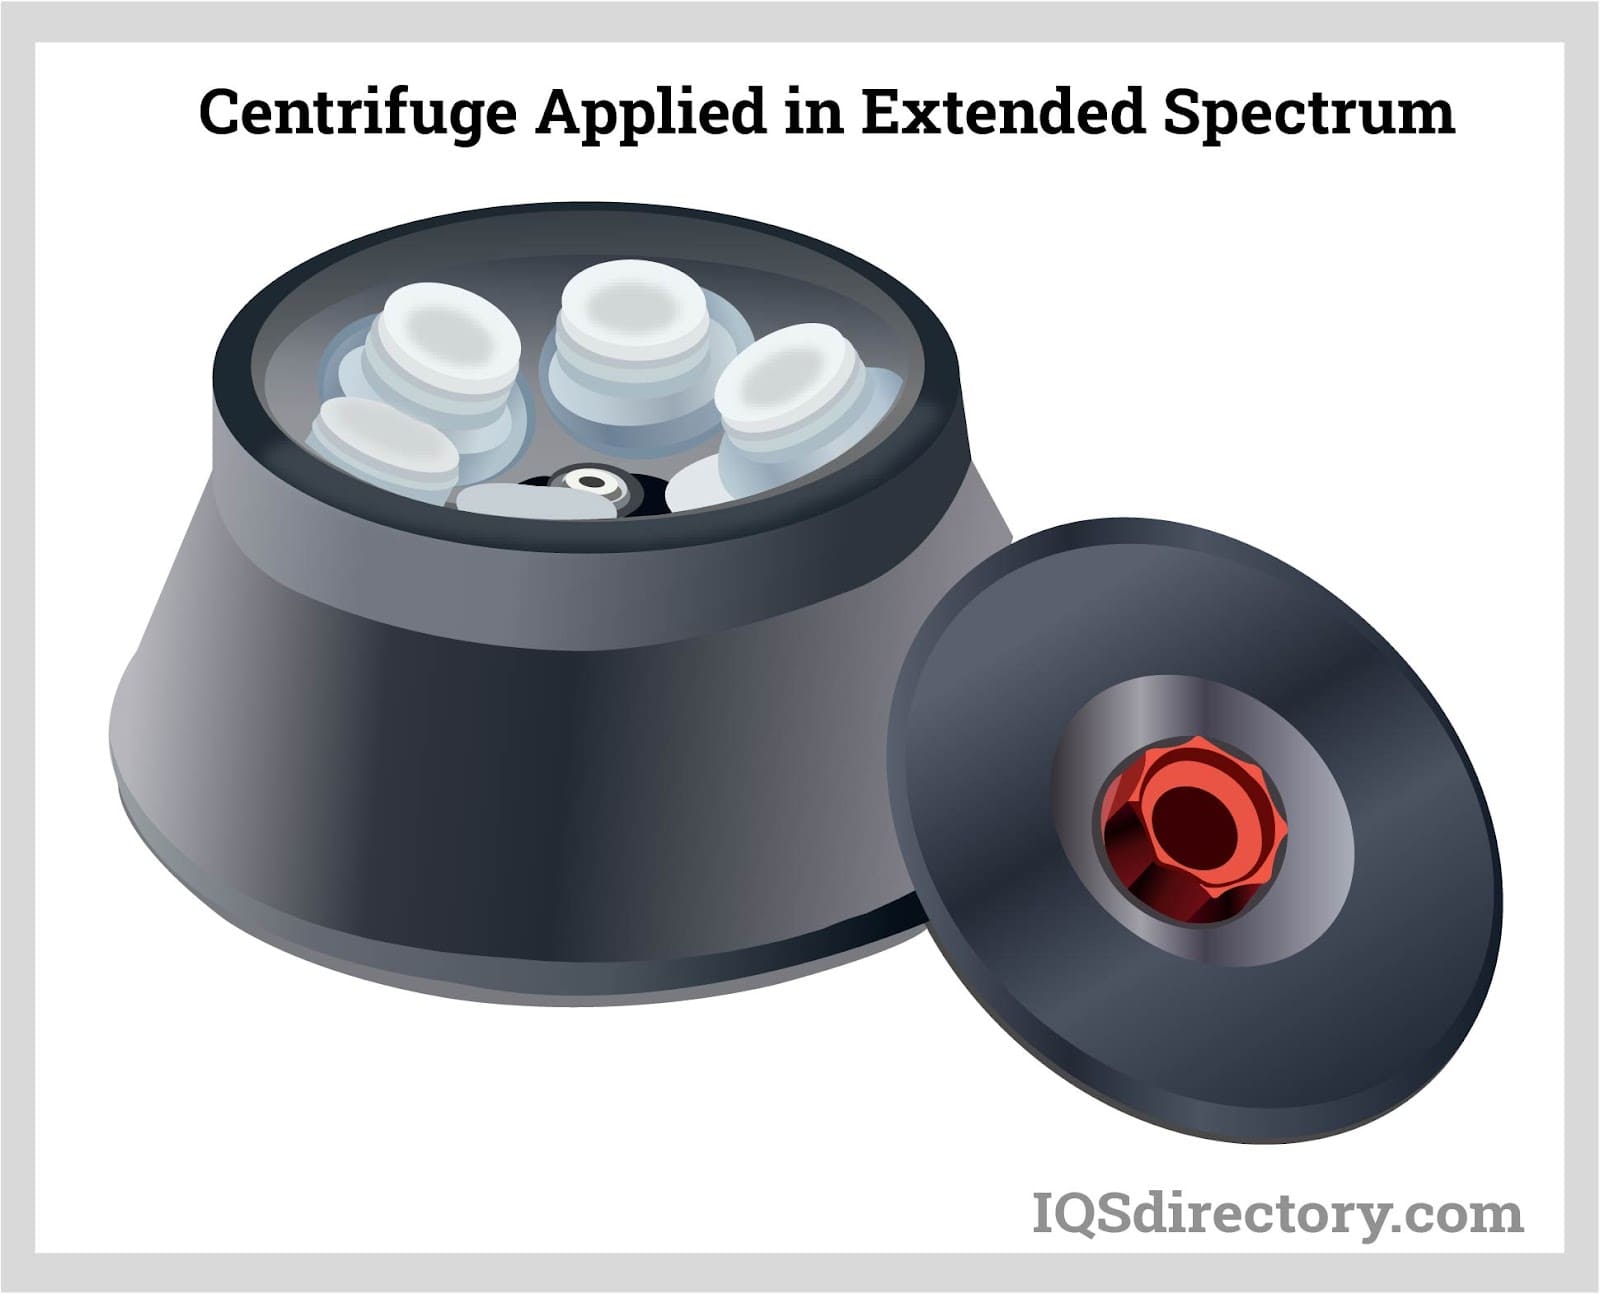 Centrifuge Applied in Extended Spectrum